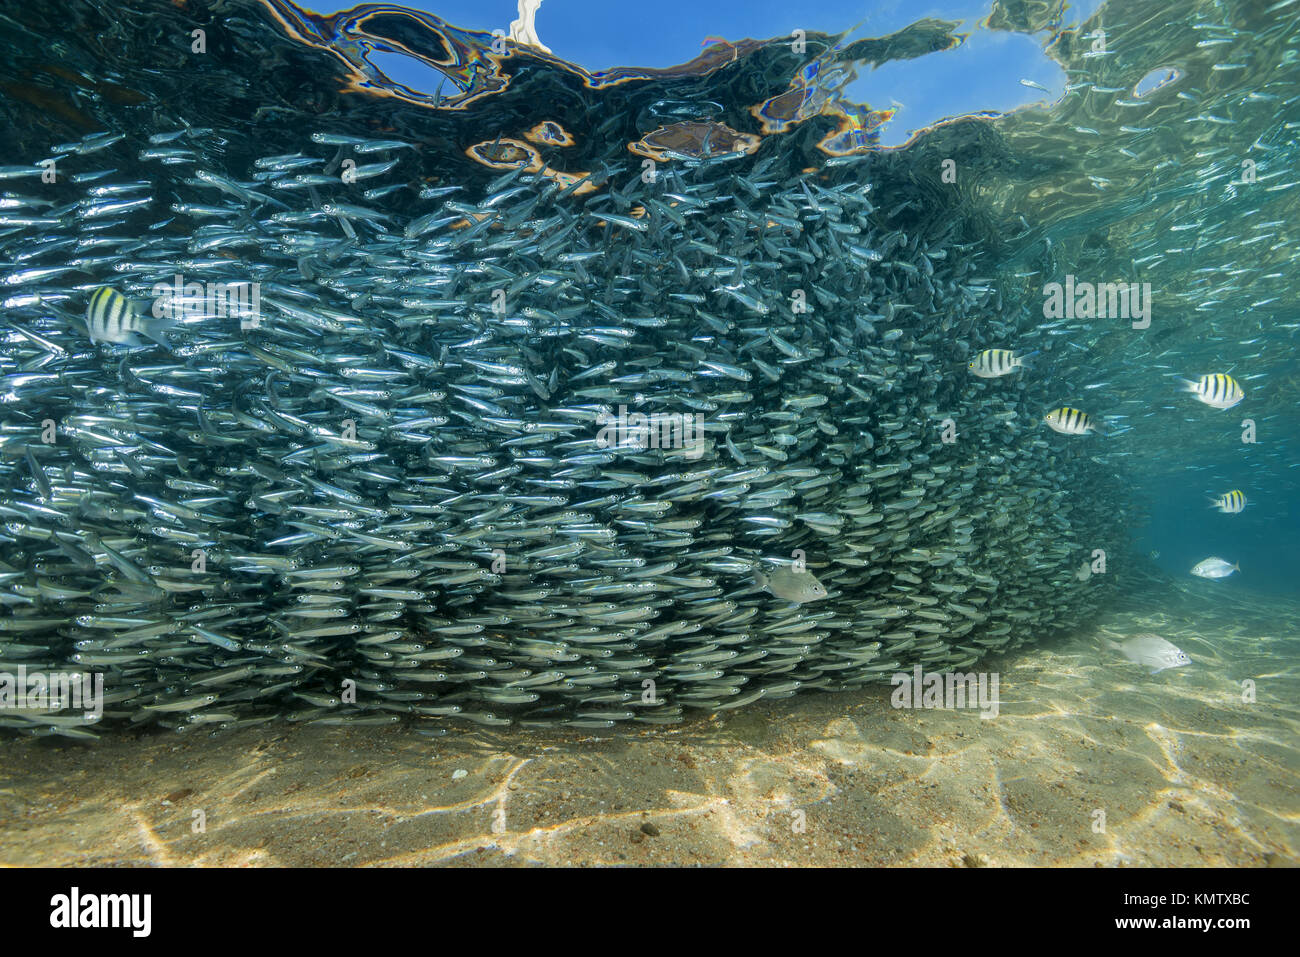 Massive school of fish in shallow water Stock Photo